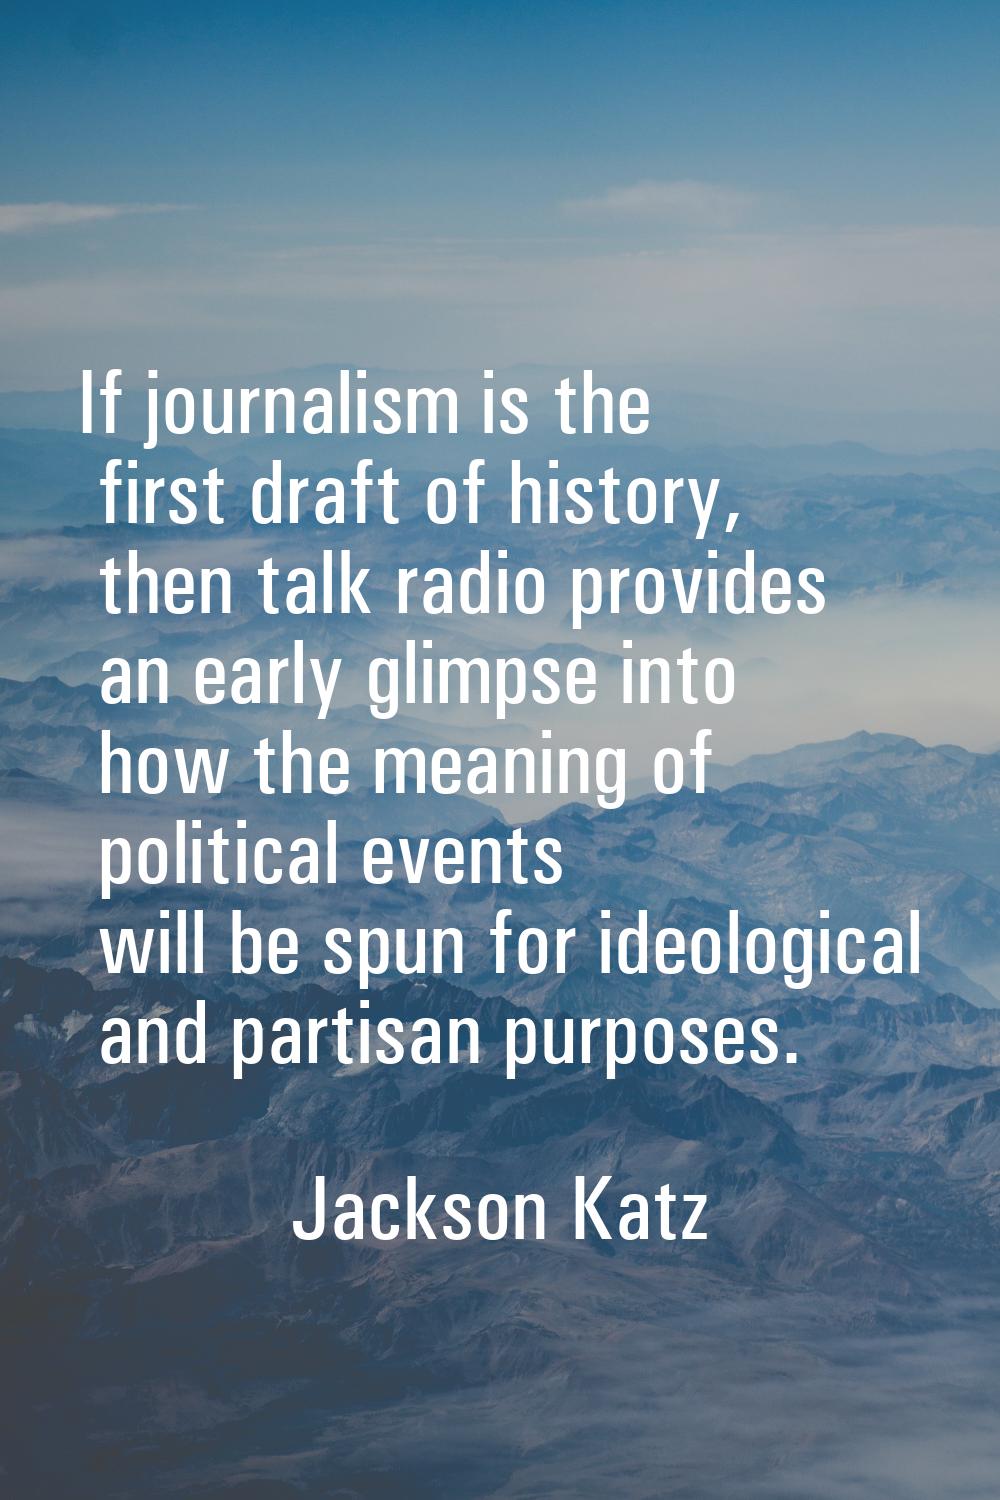 If journalism is the first draft of history, then talk radio provides an early glimpse into how the